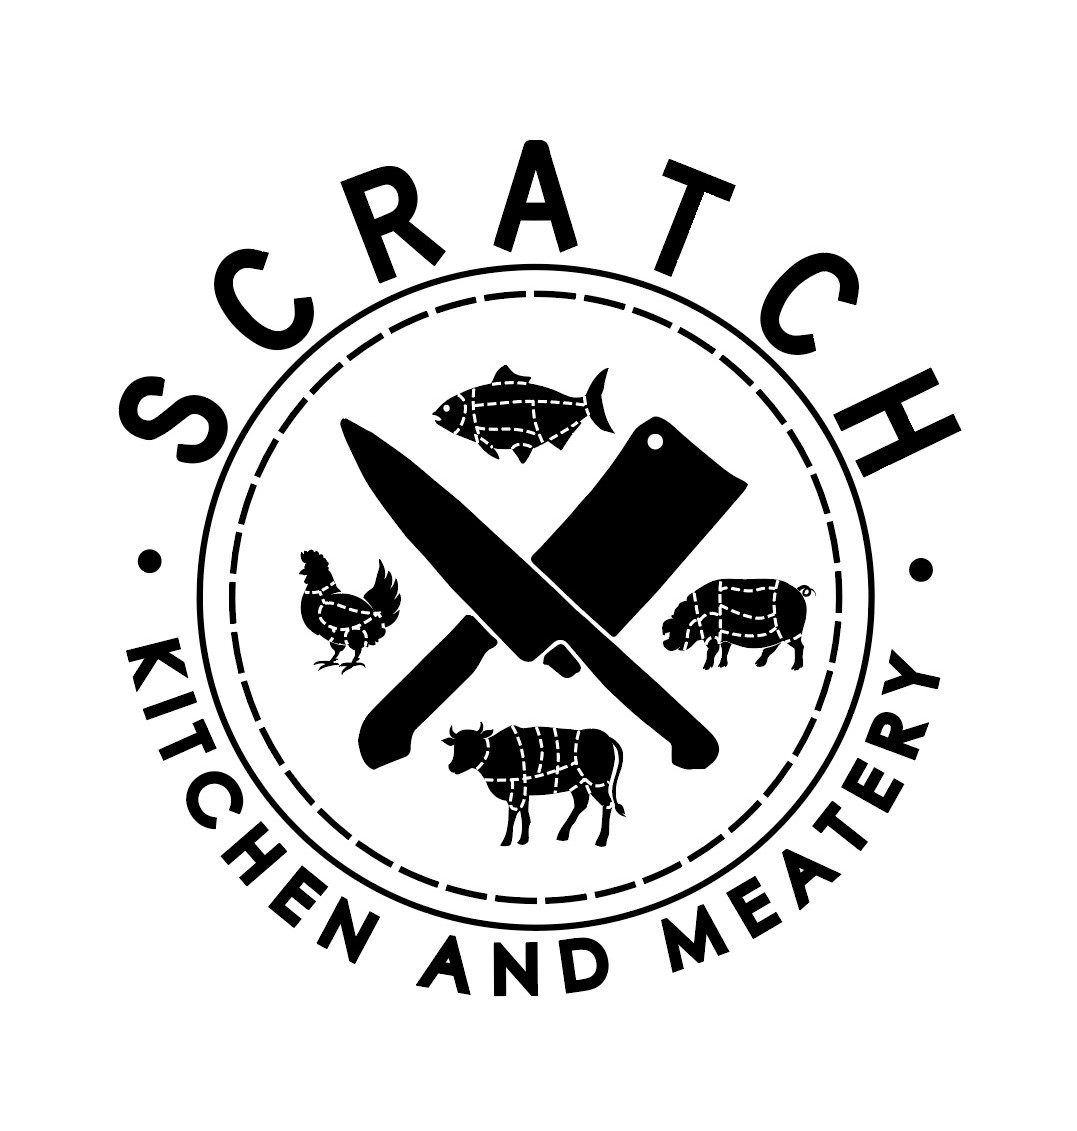 Scratch Kitchen and Meatery